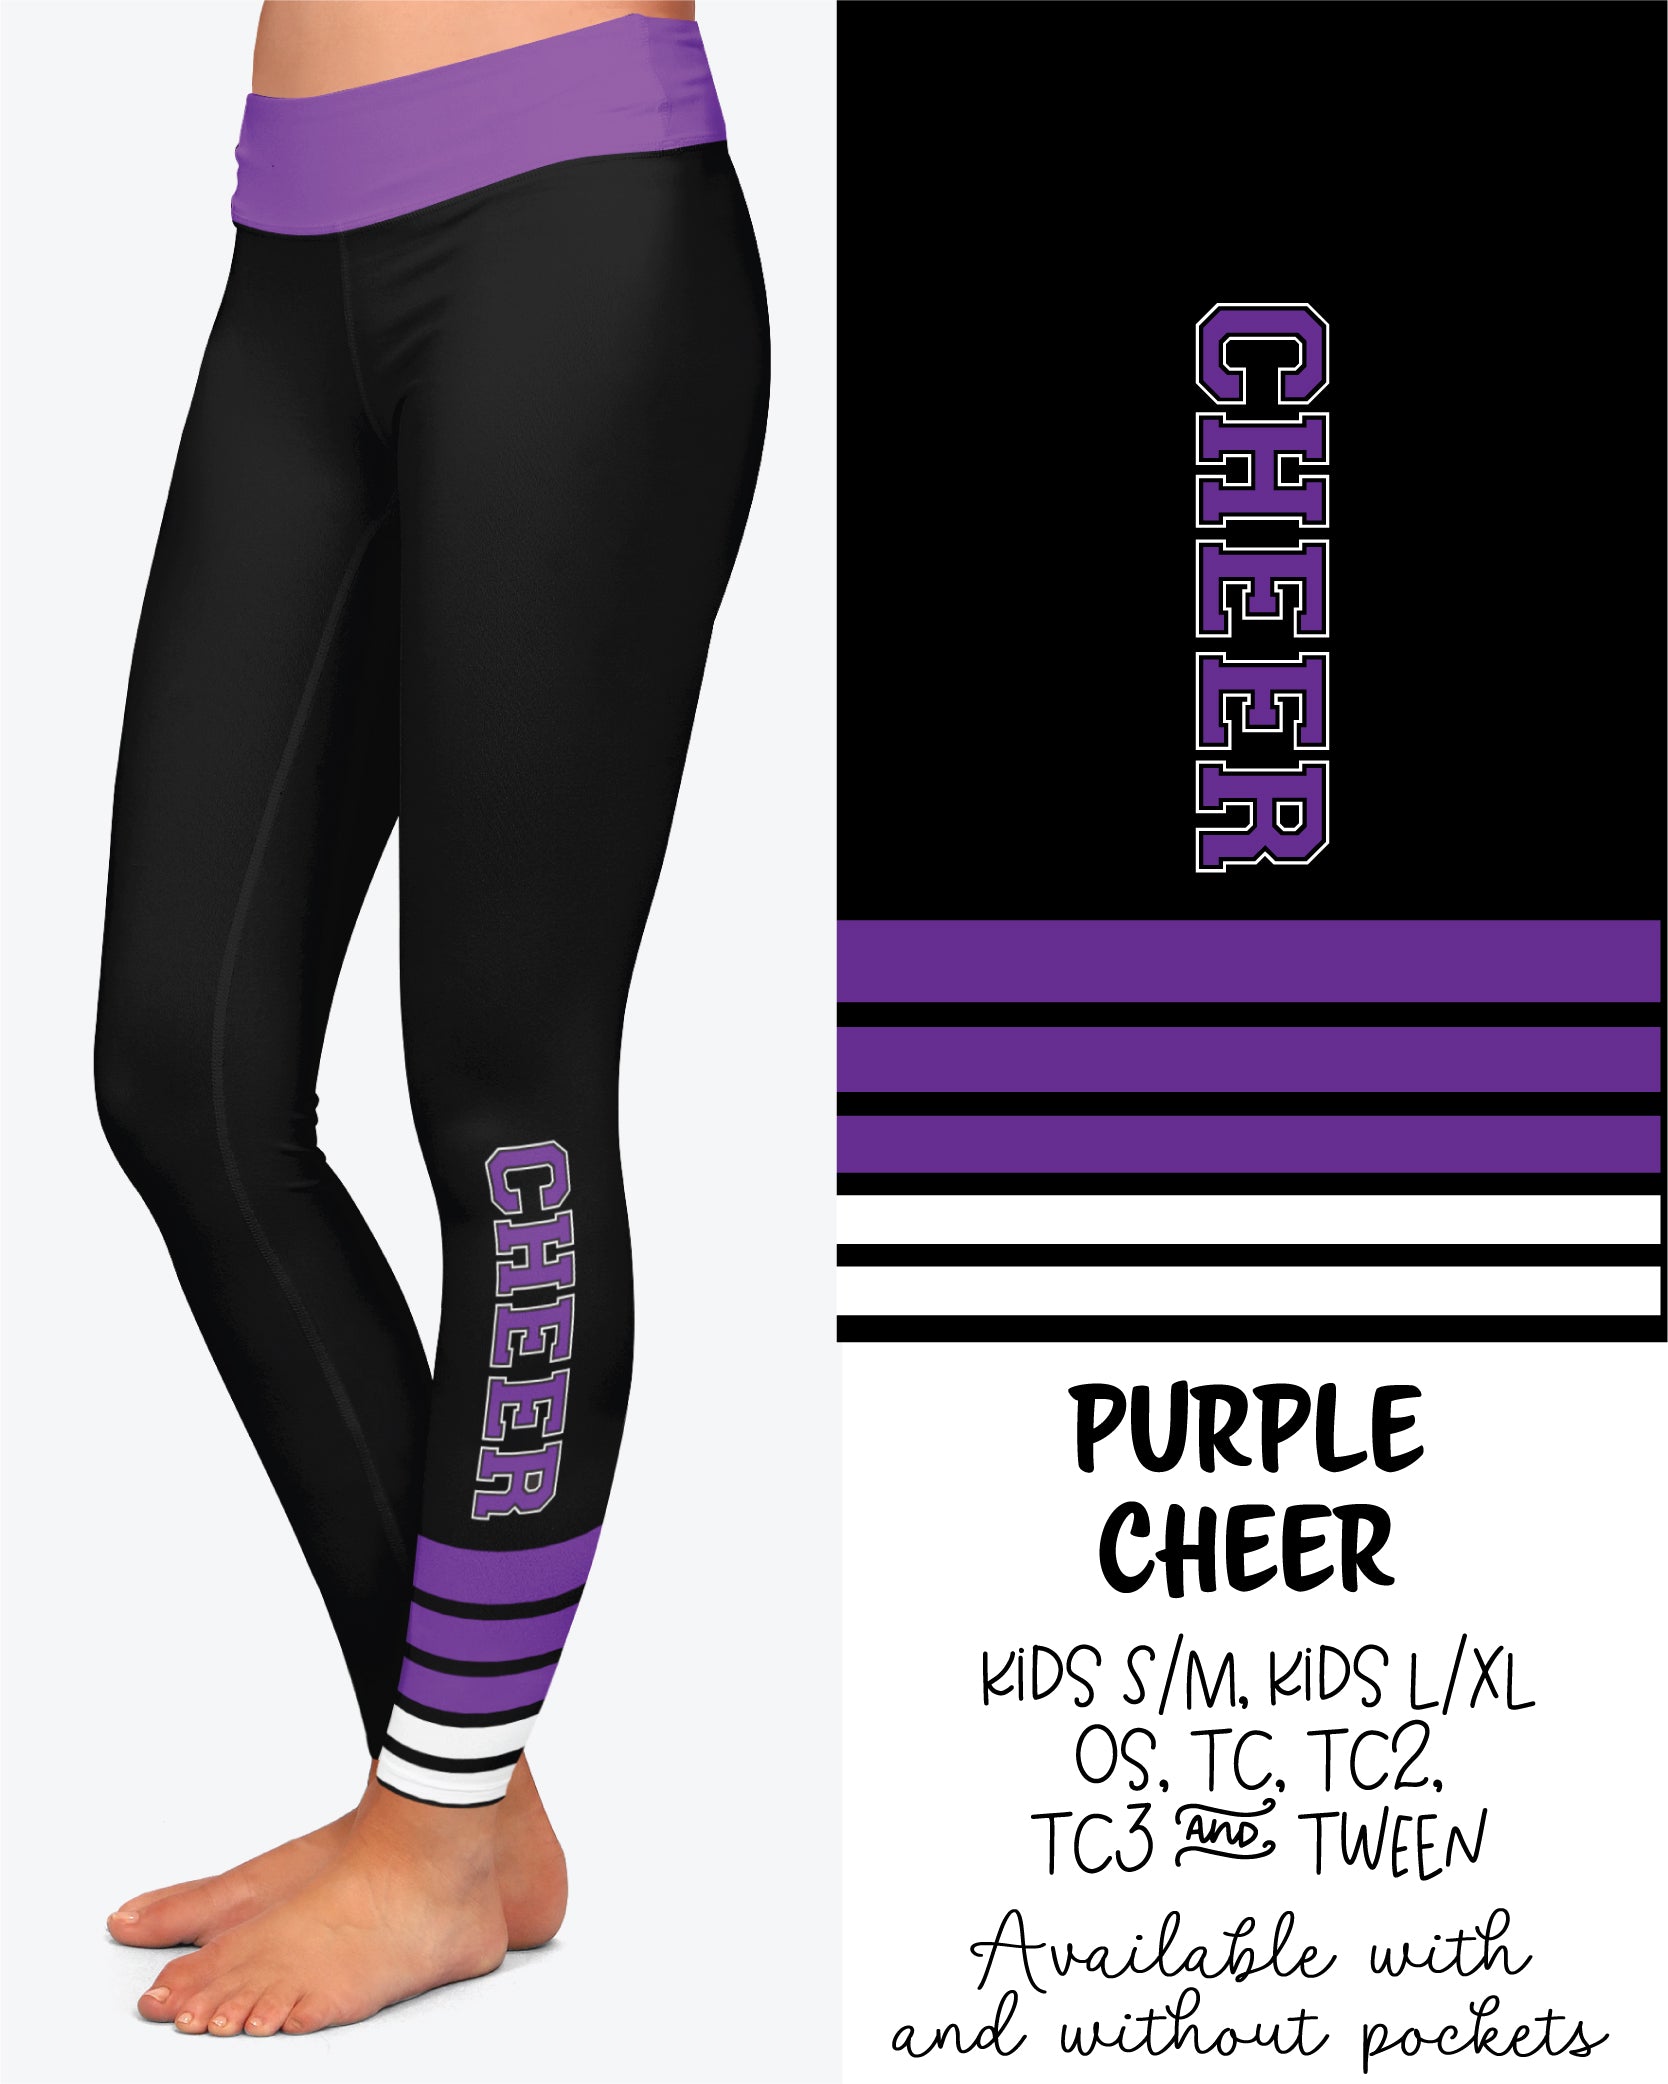 Purple Cheer Leggings Full Length With and Without Pockets Preorder 9/24